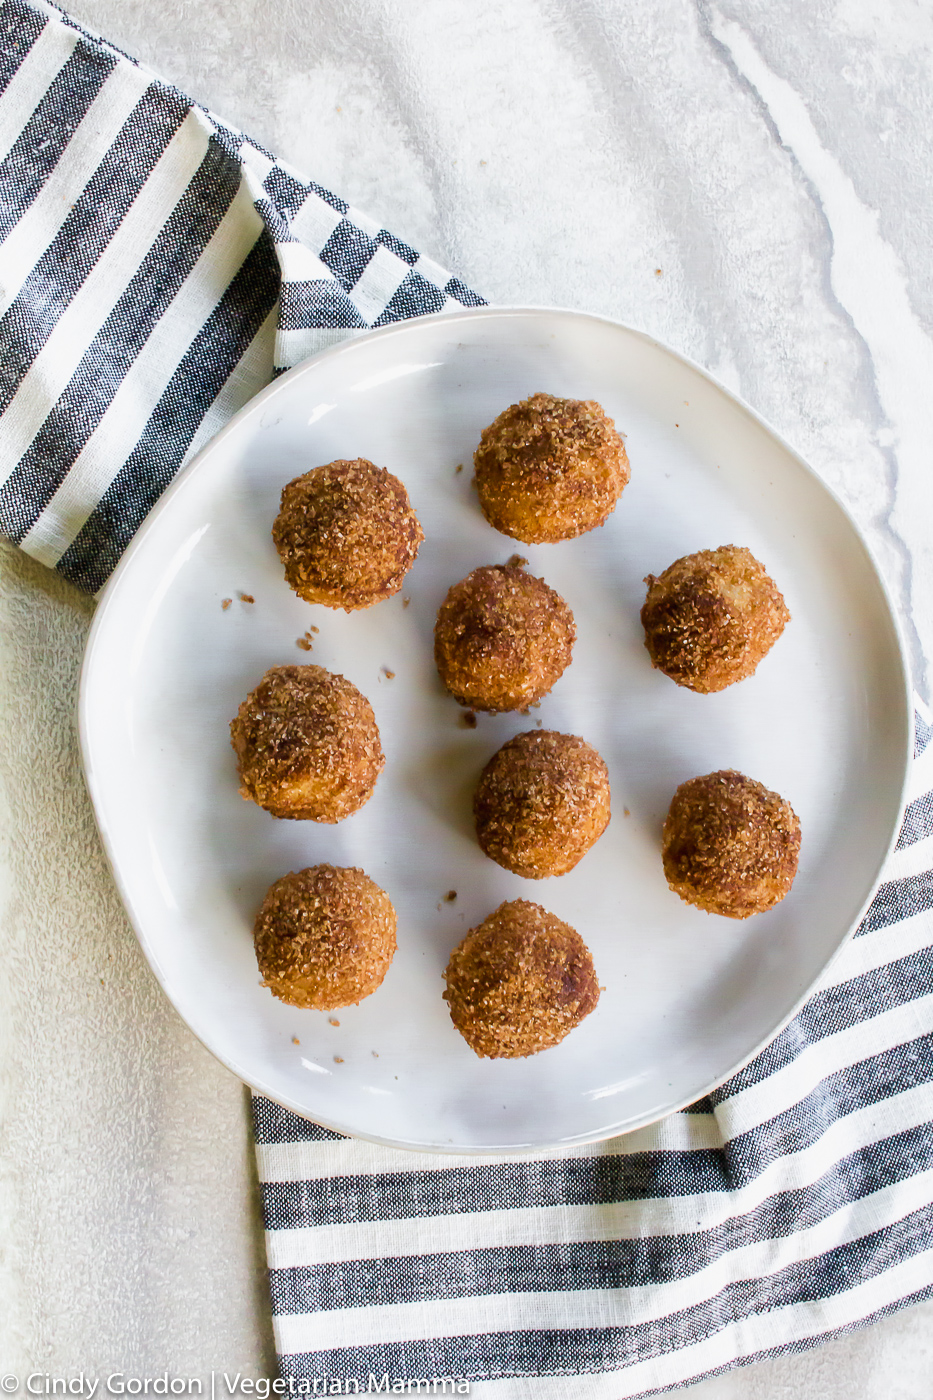 Vegan Baked donut holes on a plate